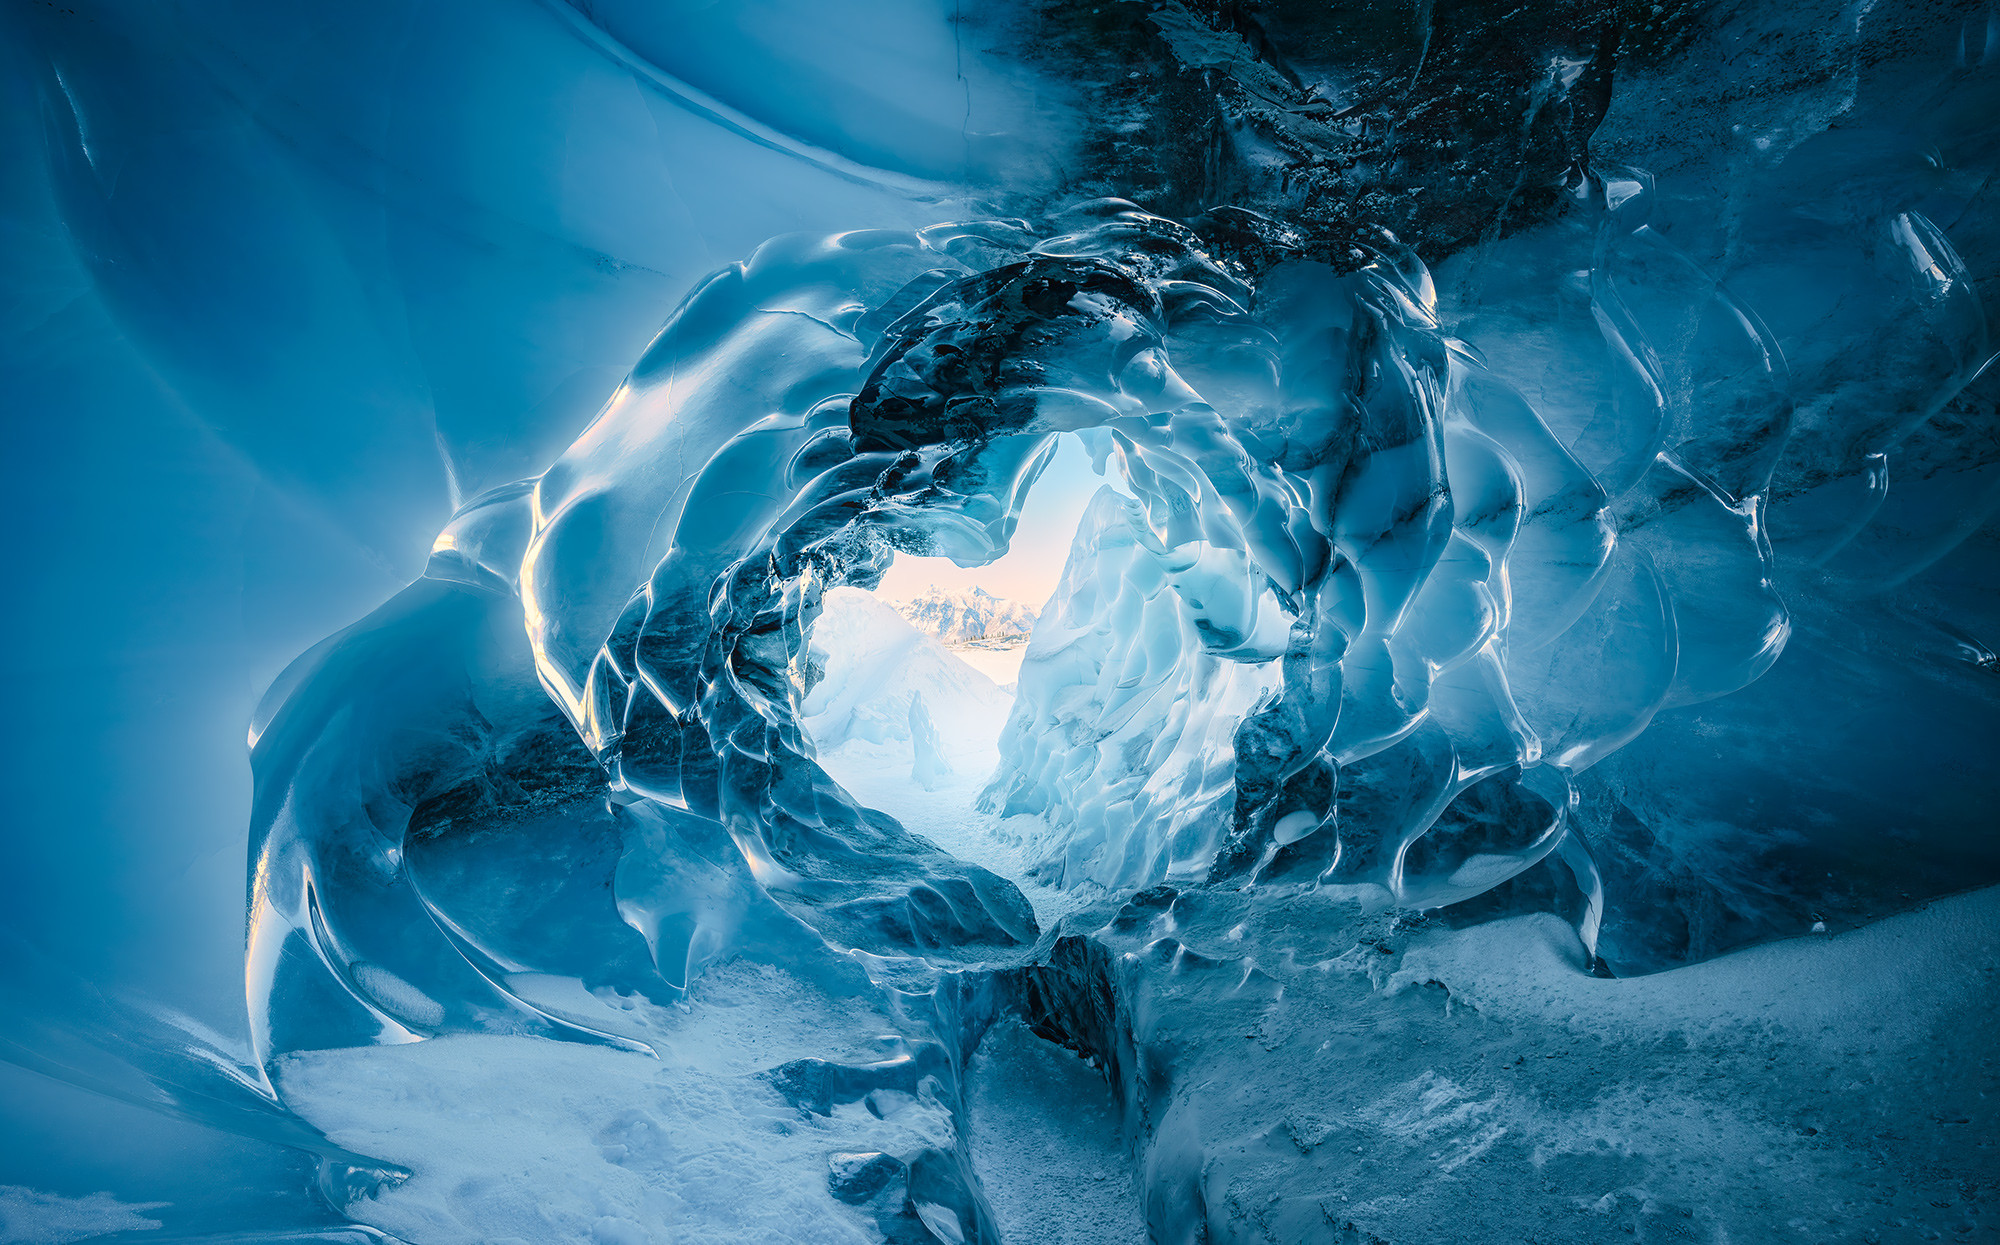 The Eye of the Glacier